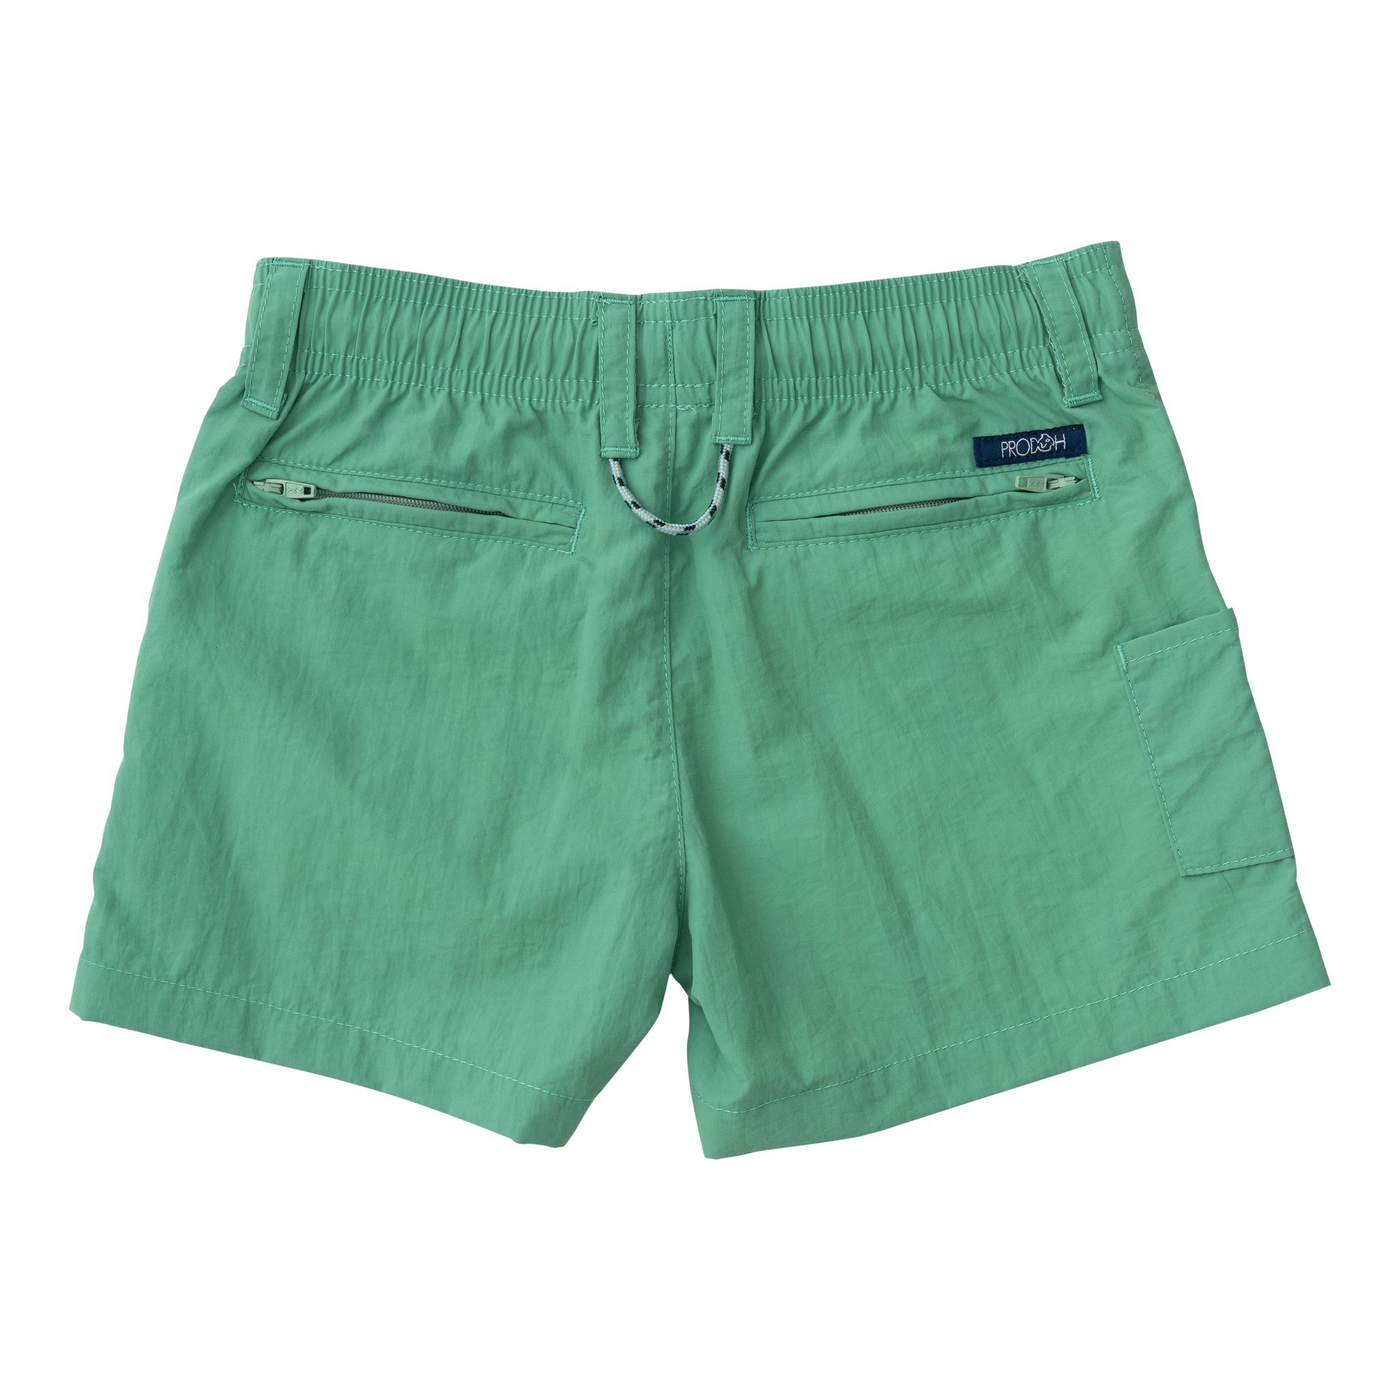 Outtrigger Performance short